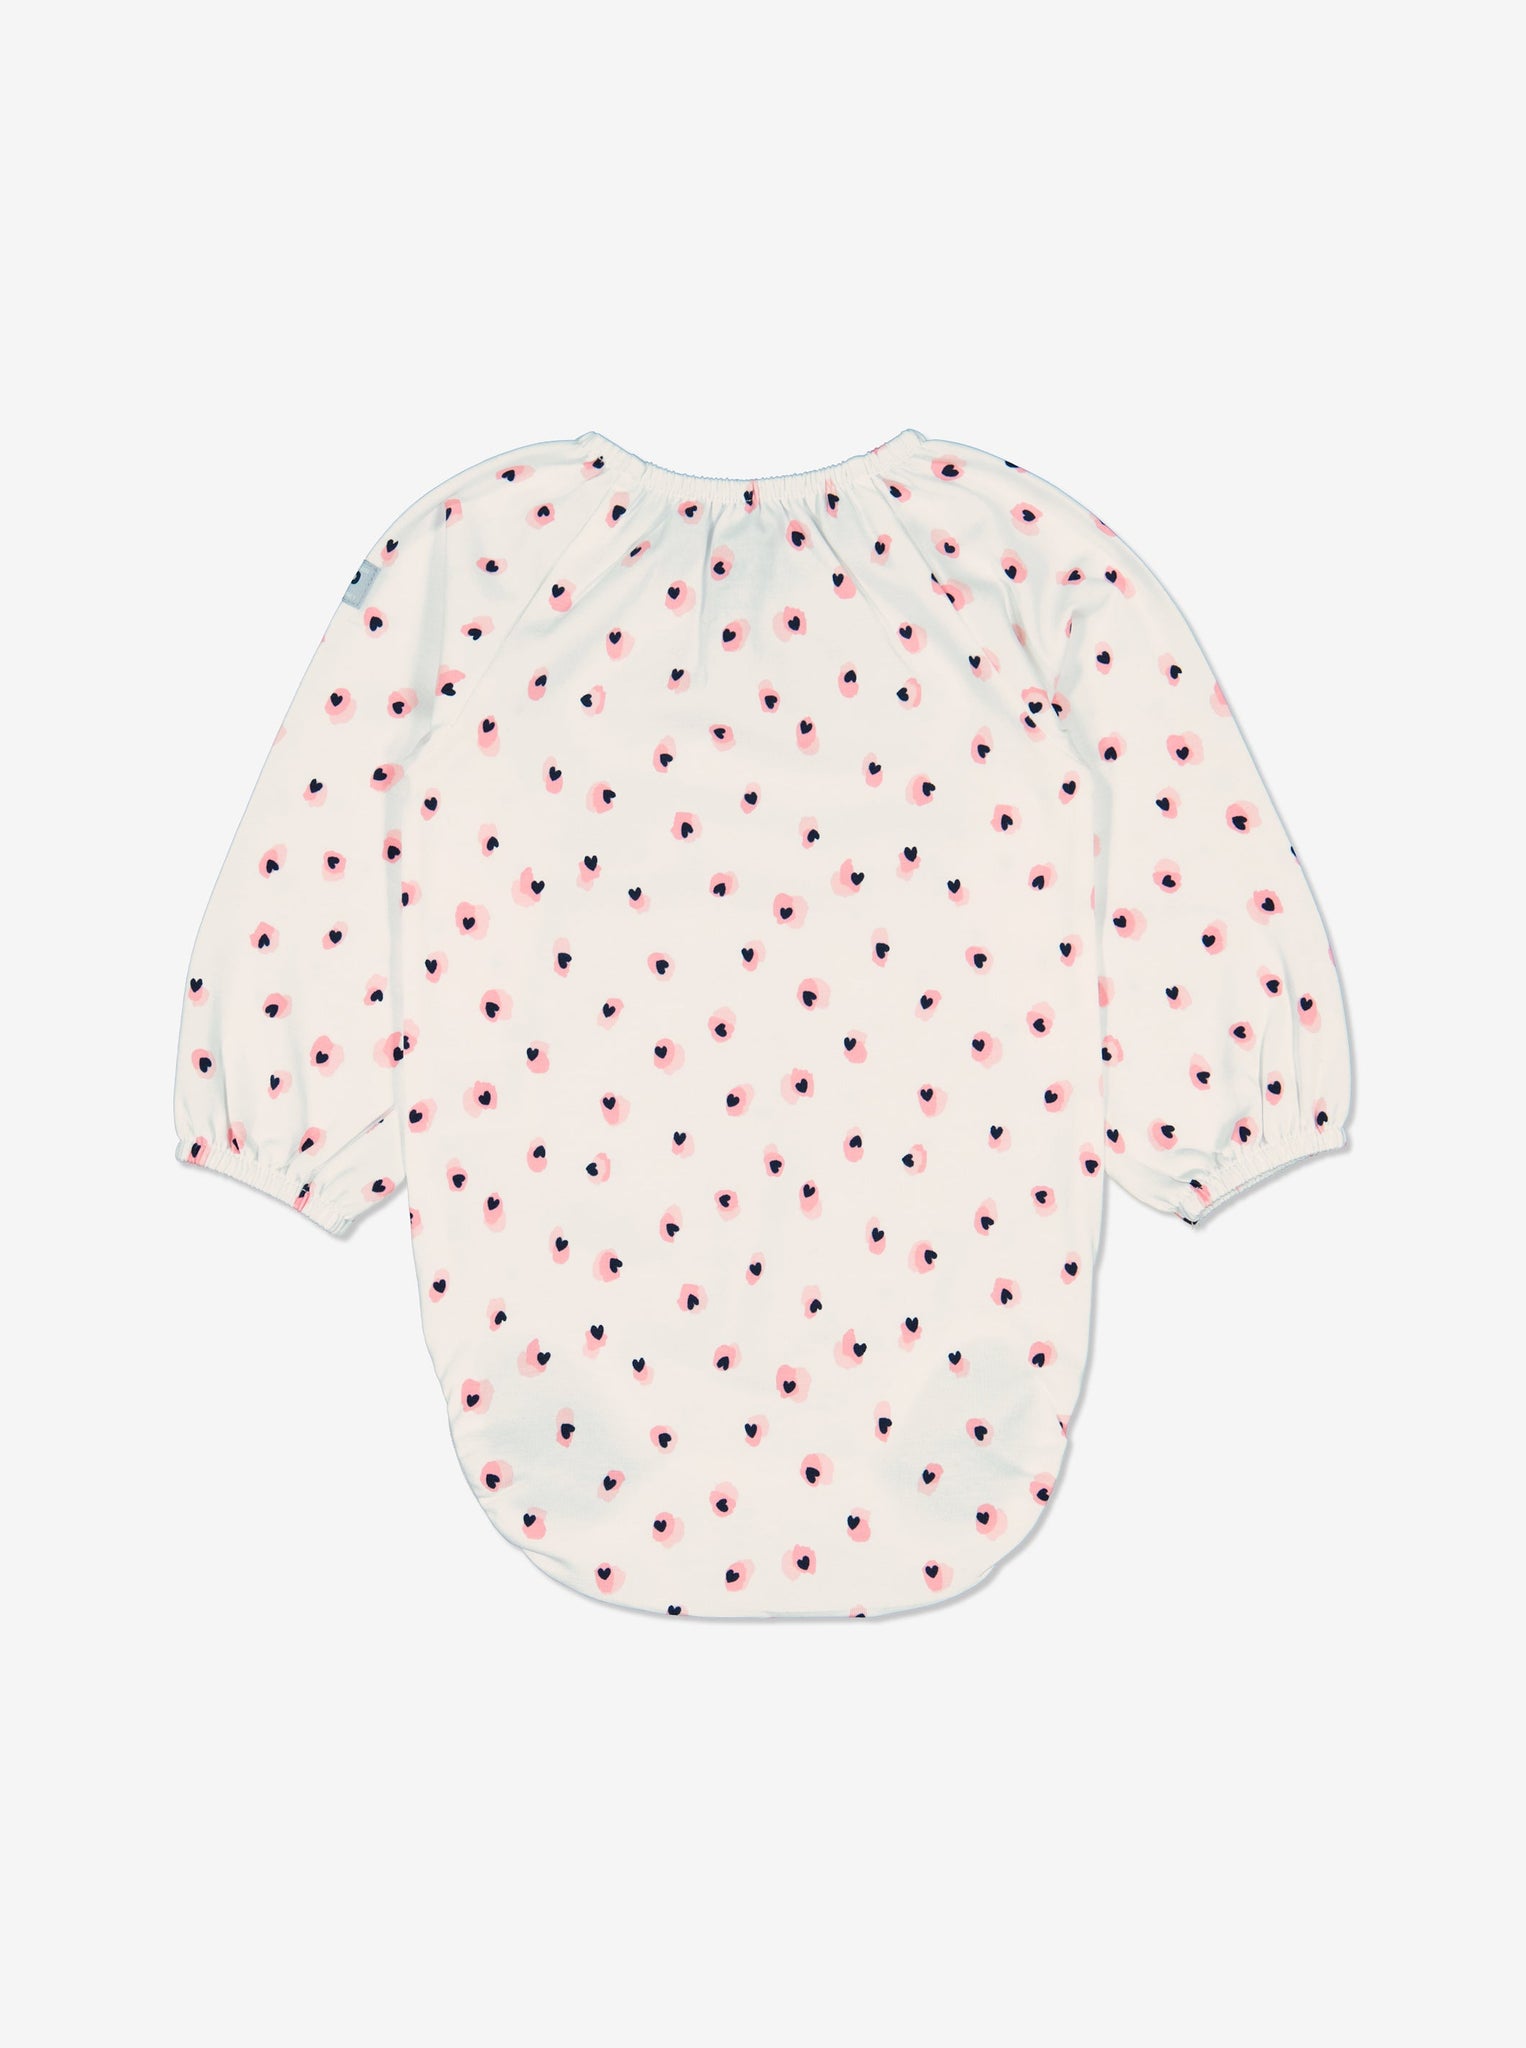  Pink Heart Print Newborn Babygrow from Polarn O. Pyret Kidswear. Made using ethically sourced materials.